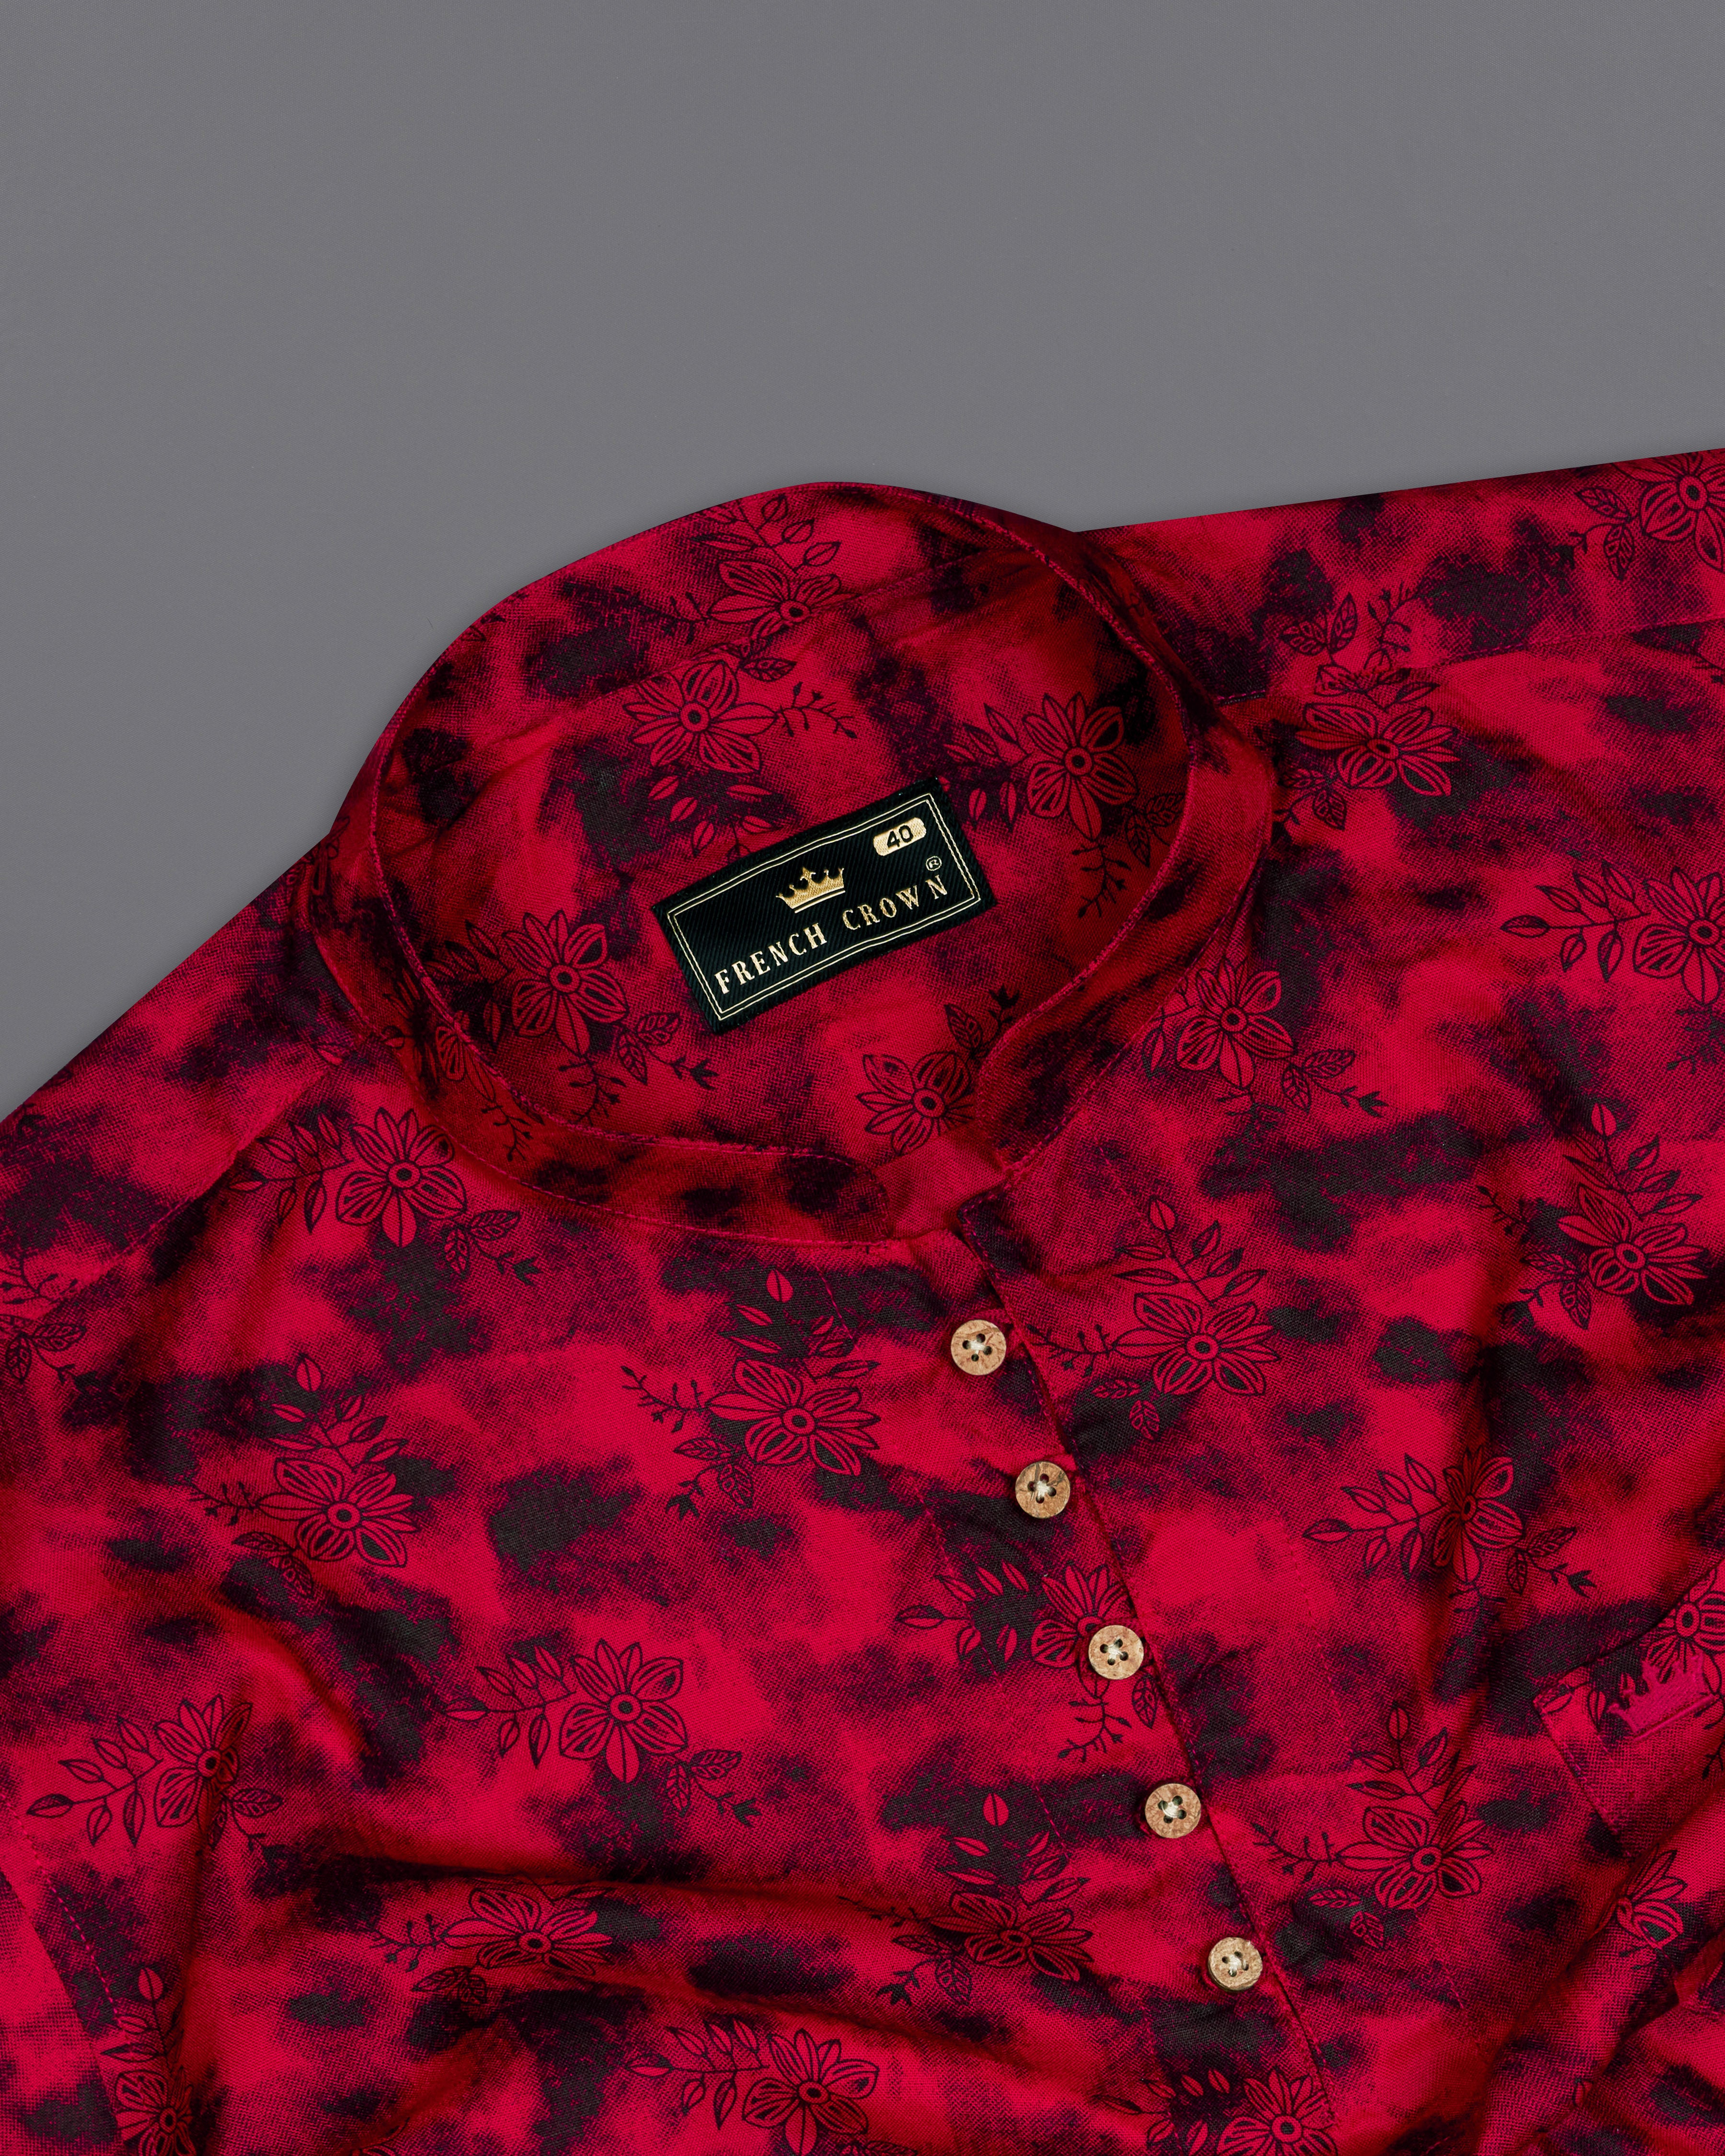 Shiraz Red and Black Floral Textured Premium Tencel Kurta Shirt 9997-KS-38, 9997-KS-H-38, 9997-KS-39, 9997-KS-H-39, 9997-KS-40, 9997-KS-H-40, 9997-KS-42, 9997-KS-H-42, 9997-KS-44, 9997-KS-H-44, 9997-KS-46, 9997-KS-H-46, 9997-KS-48, 9997-KS-H-48, 9997-KS-50, 9997-KS-H-50, 9997-KS-52, 9997-KS-H-52